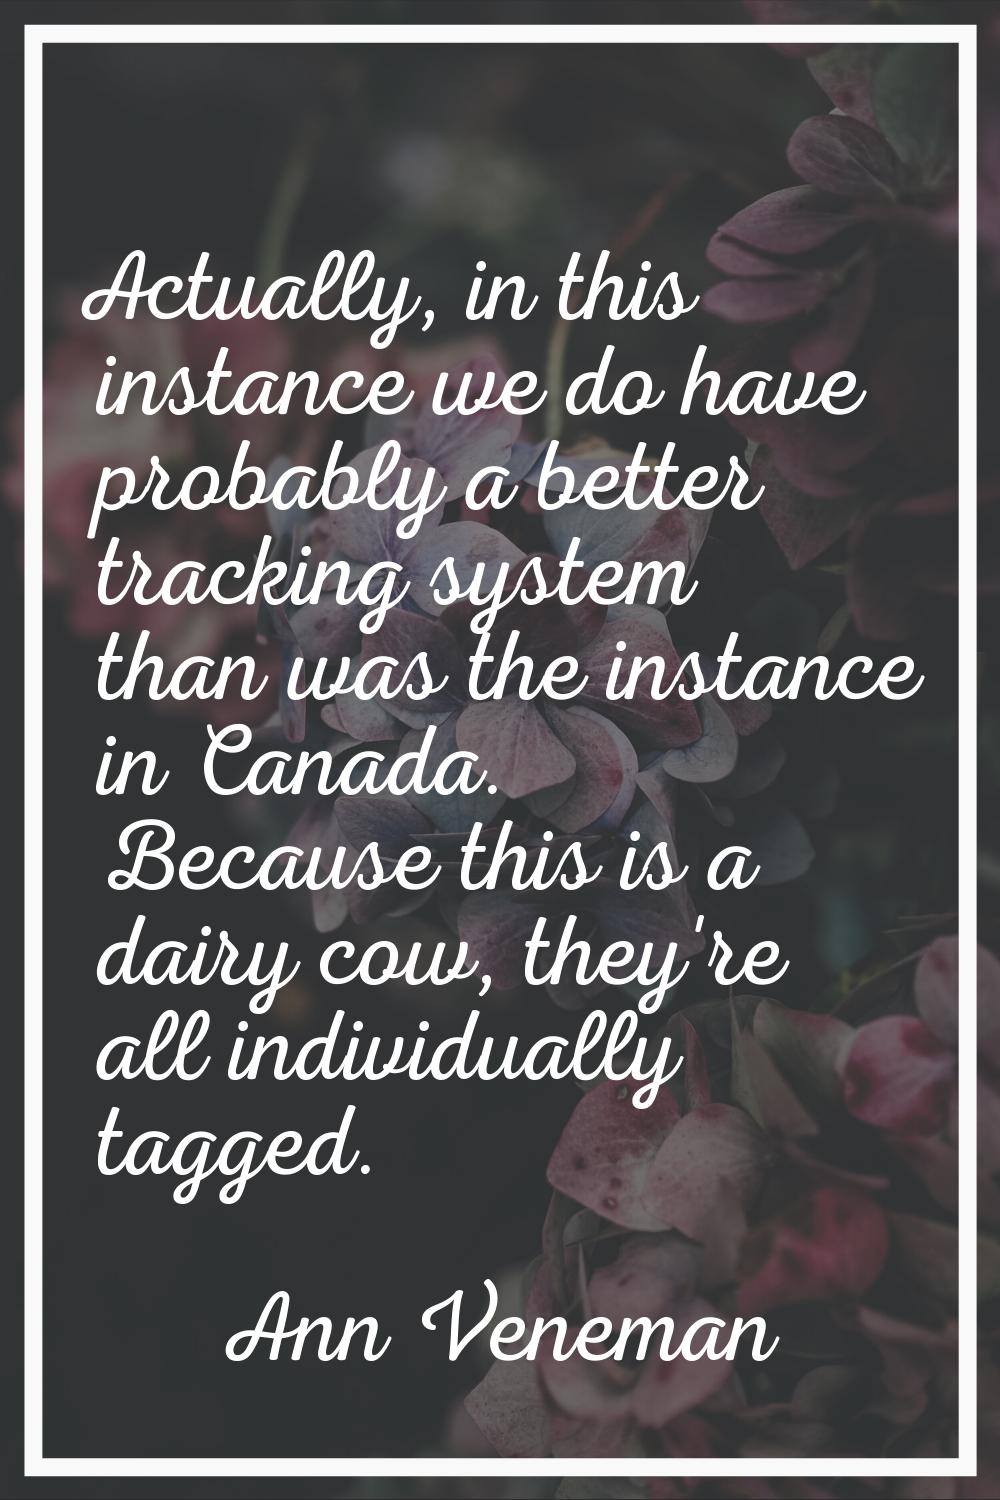 Actually, in this instance we do have probably a better tracking system than was the instance in Ca